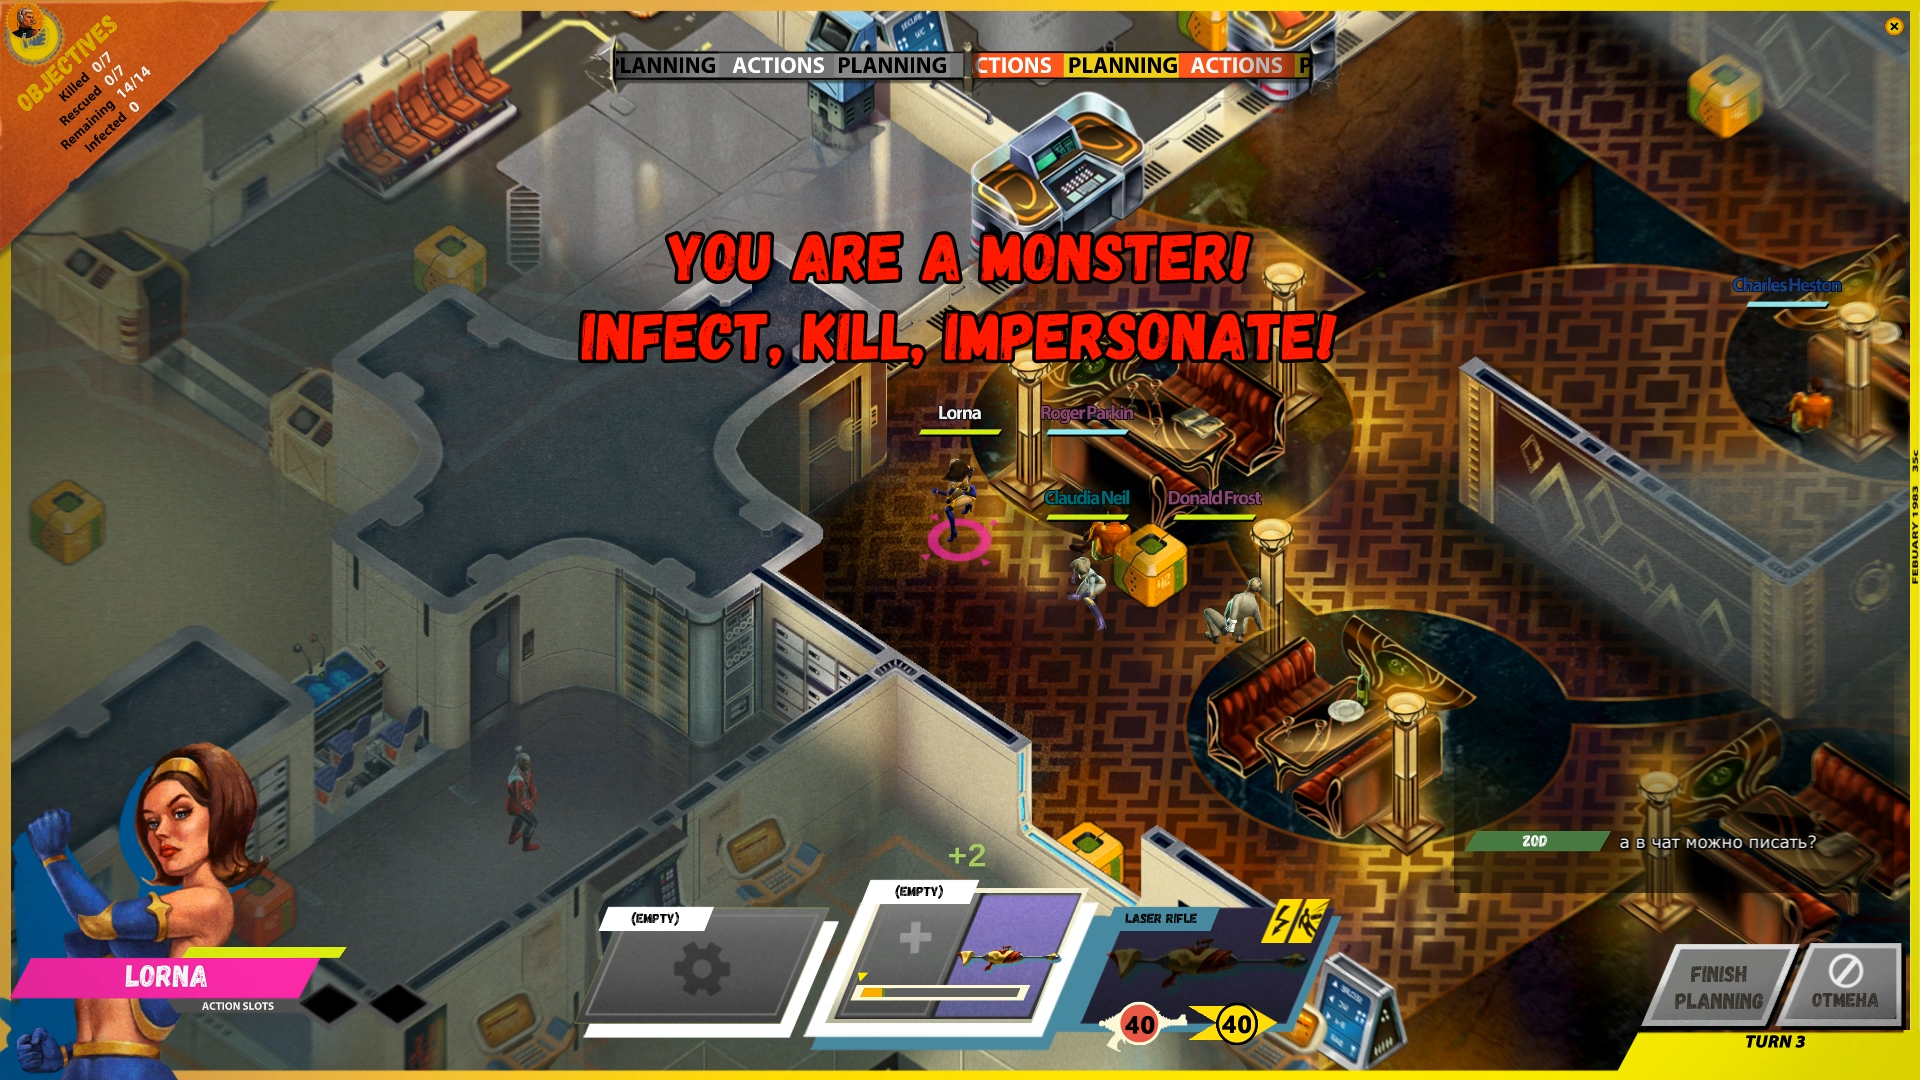 i am not a monster first contact review download free